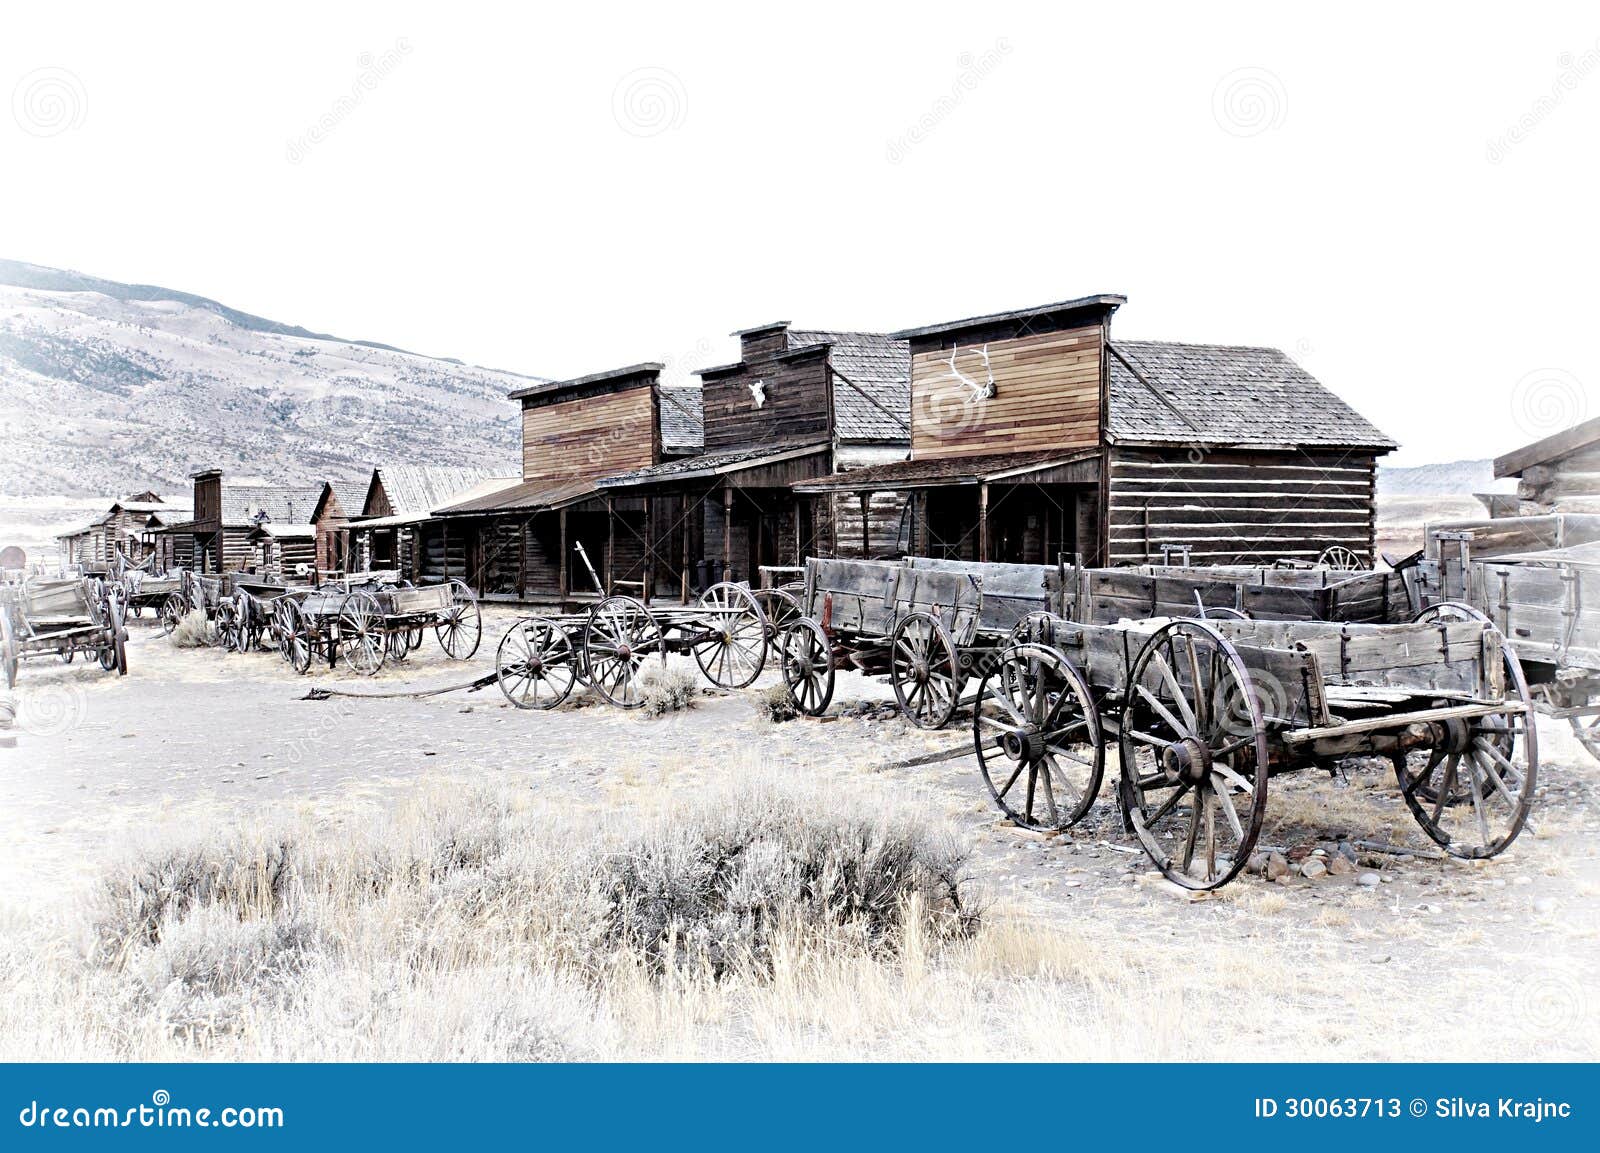 cody, wyoming, old wooden wagons in a ghost town, united states